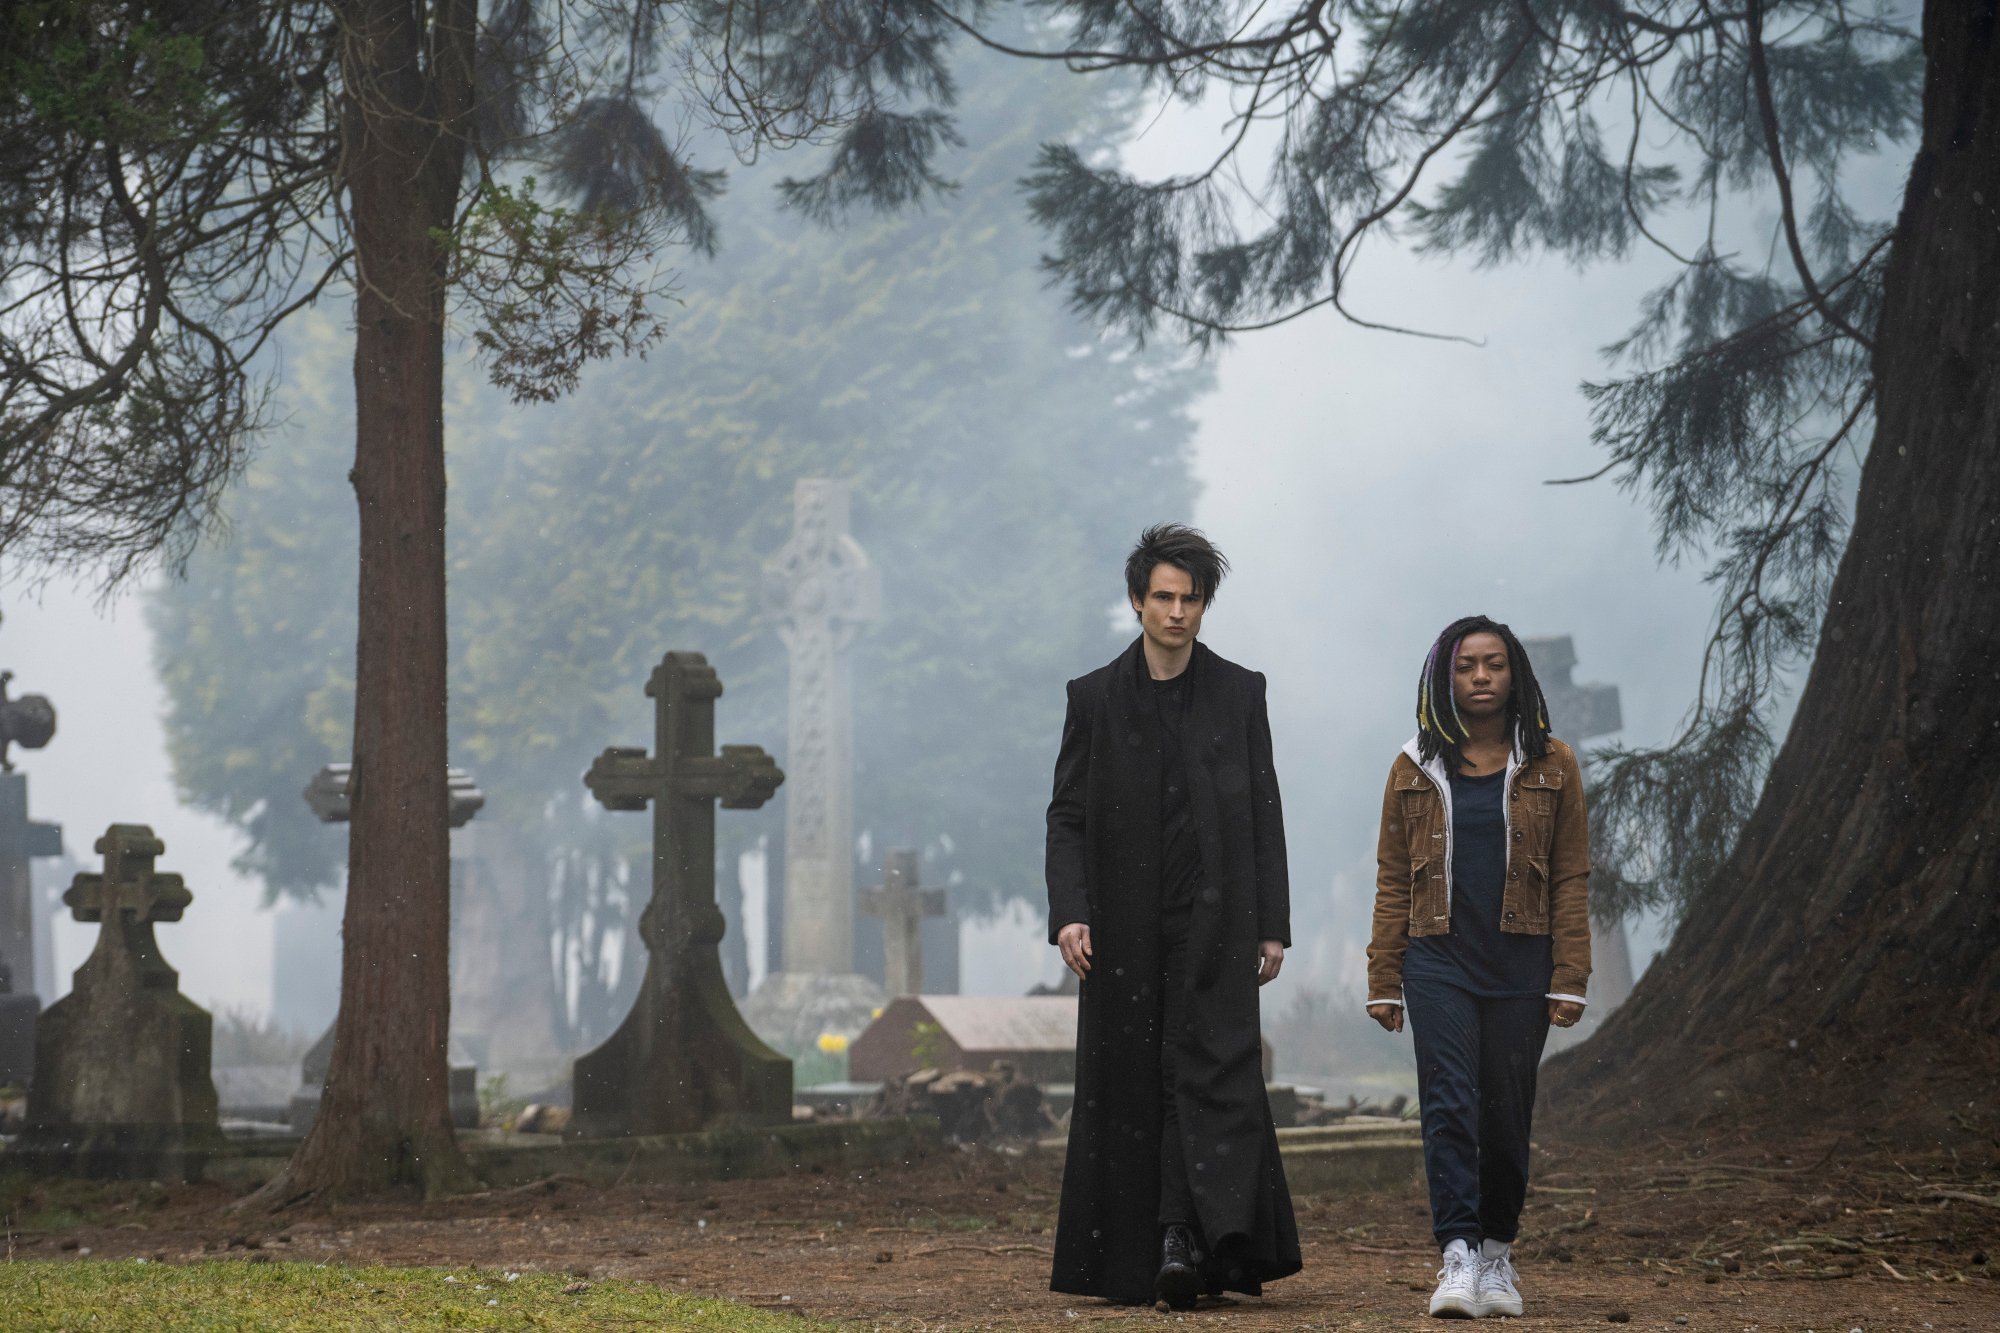 Tom Sturridge and Kyo Ra as Morpheus and Rose Walker in 'The Sandman' for our review of the Netflix series. The characters are walking side by side in a graveyard.